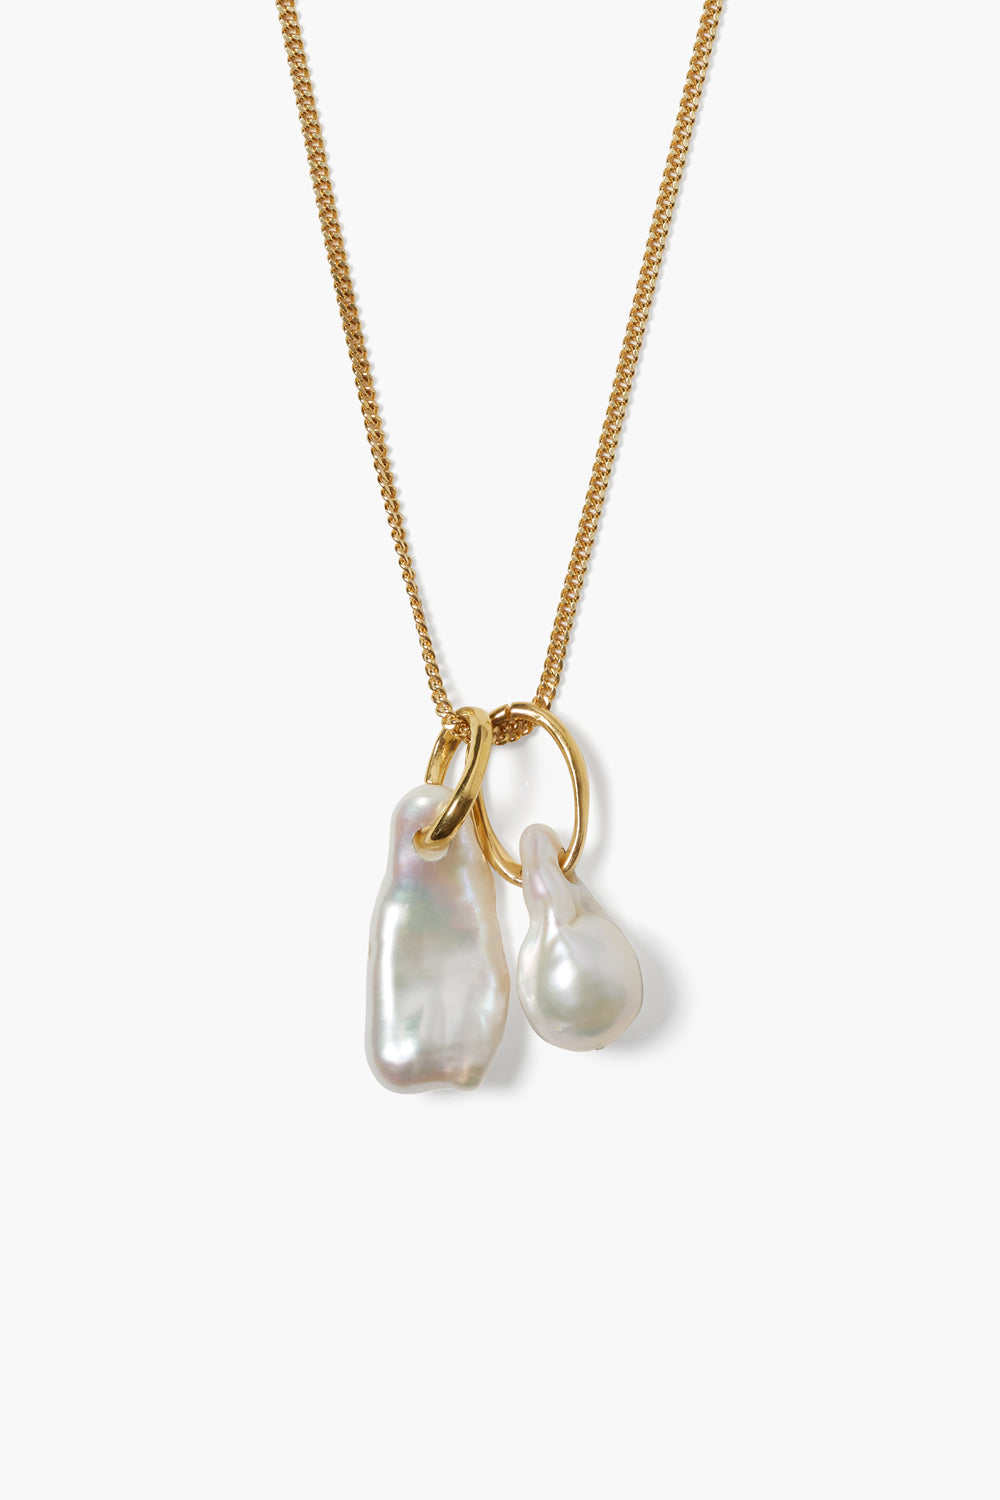 BIWA AND BAROQUE NECKLACE-WHITE PEARL MIX - Kingfisher Road - Online Boutique